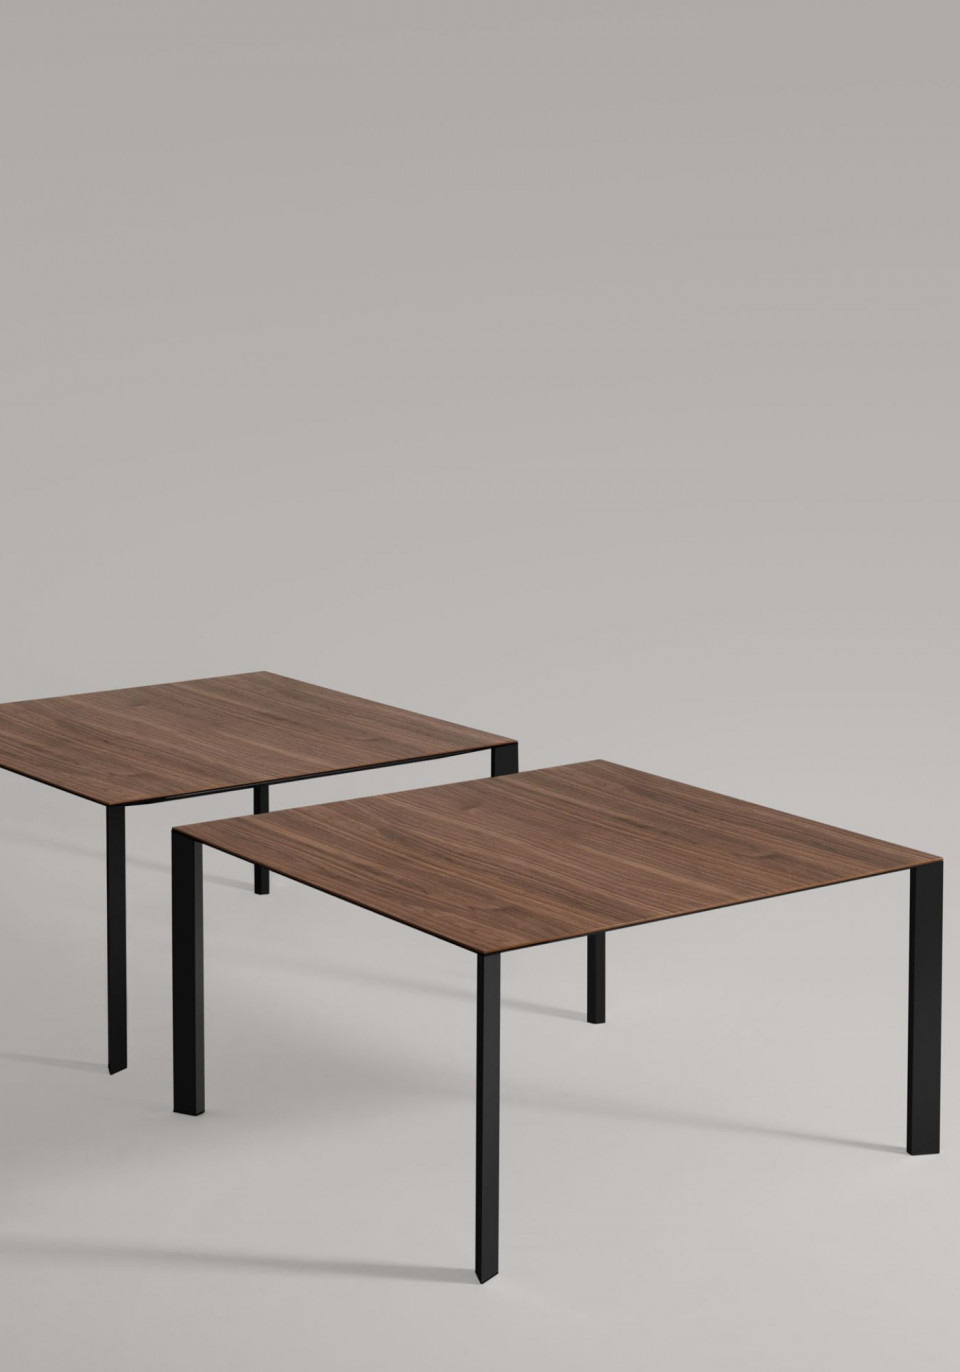 Akashi table collection by MIDJ design Paolo Vernier